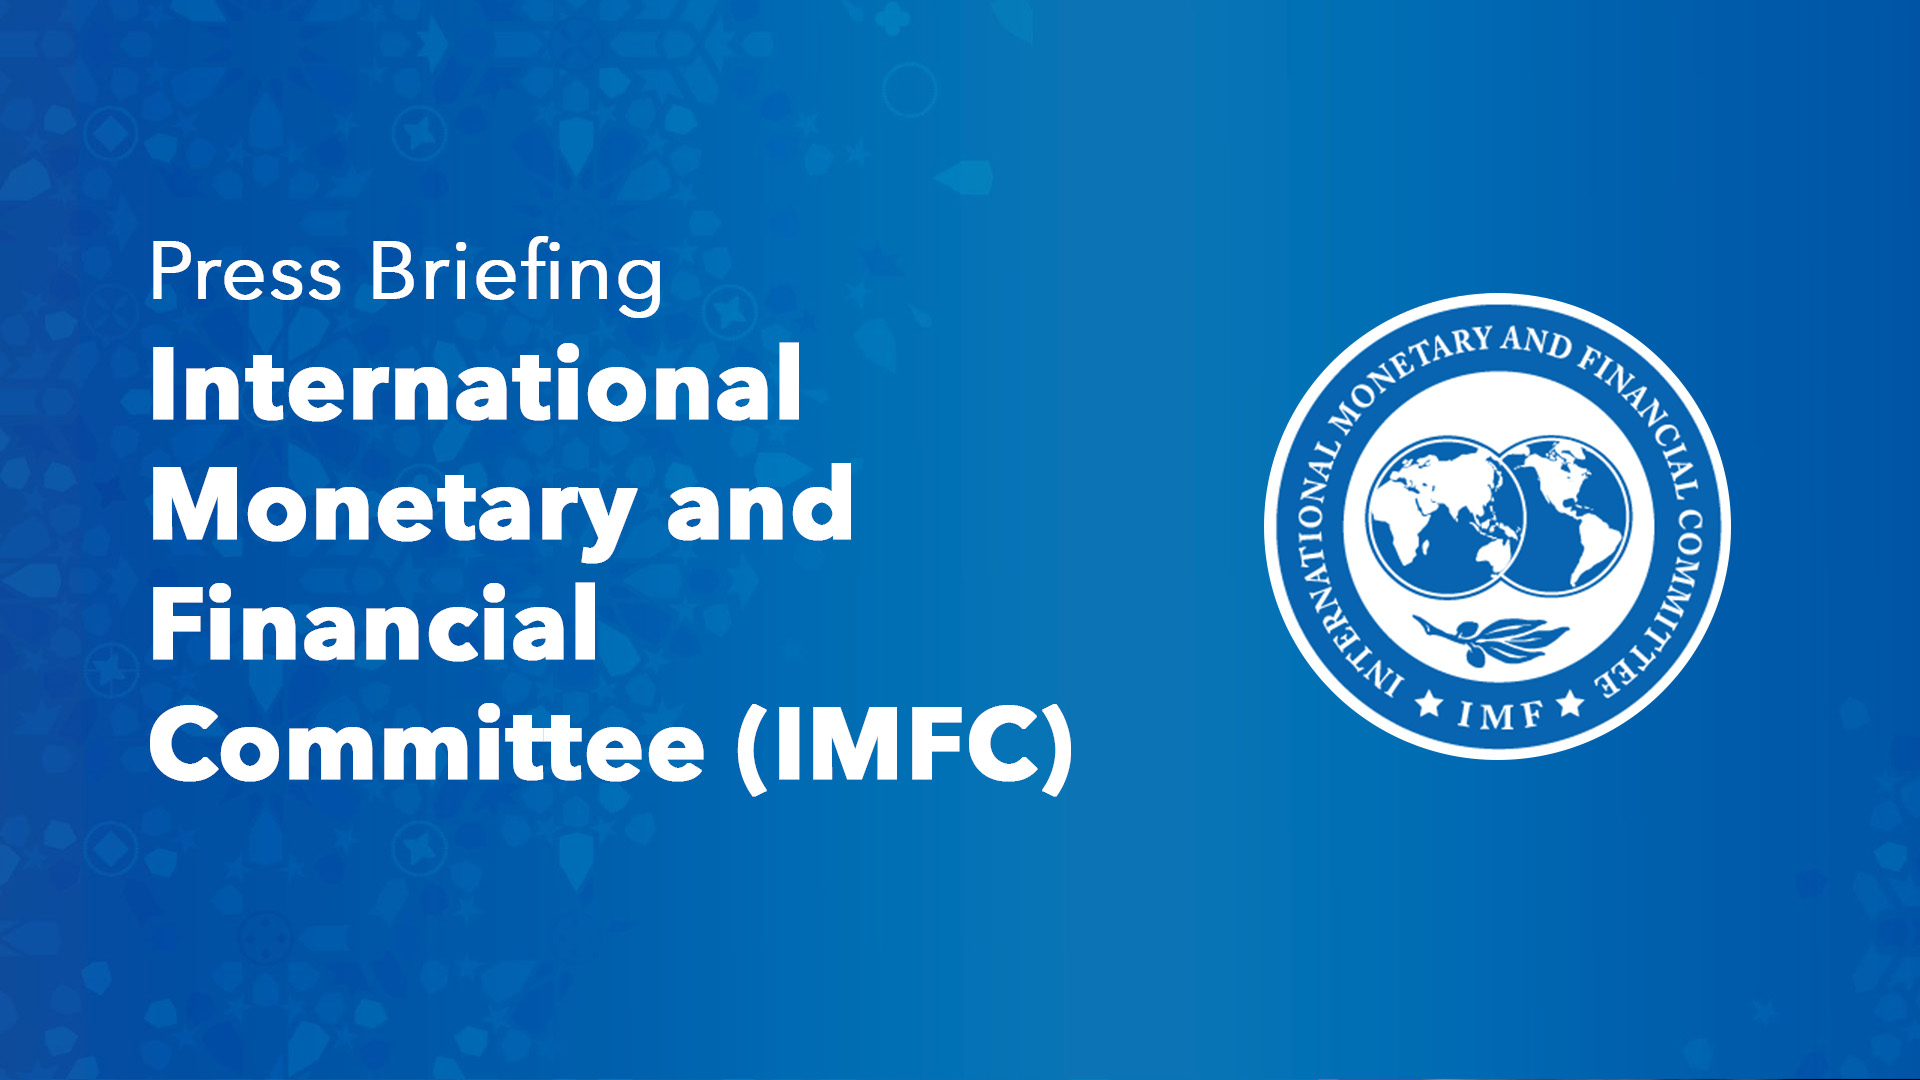 Press Briefing: International Monetary and Financial Committee (IMFC)